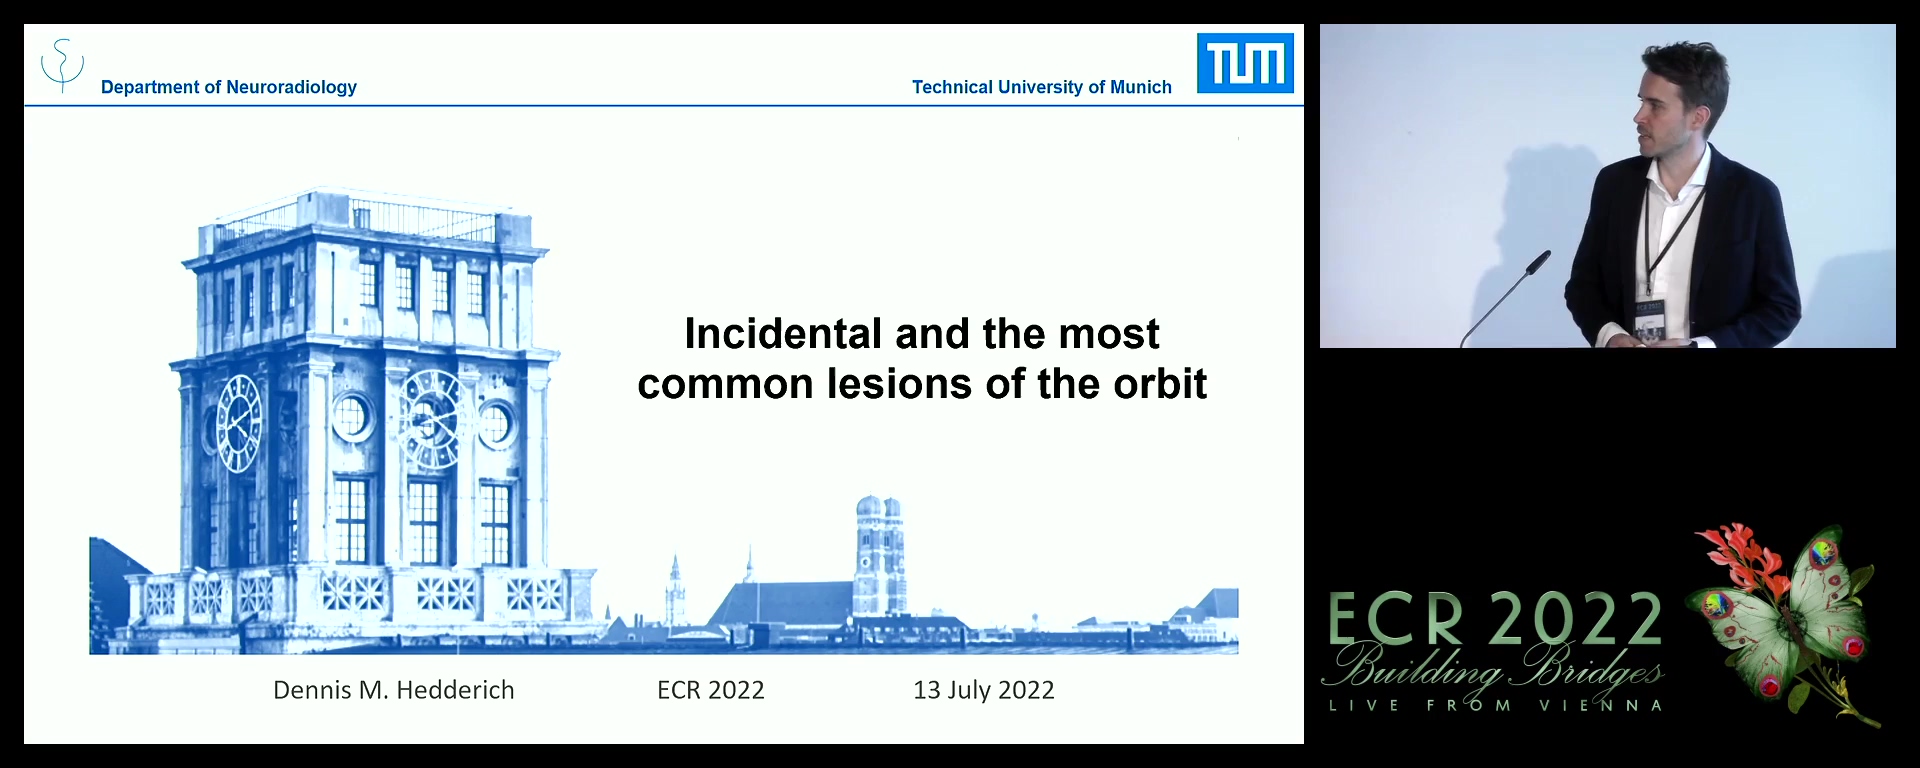 Incidental and the most common lesions of the orbit